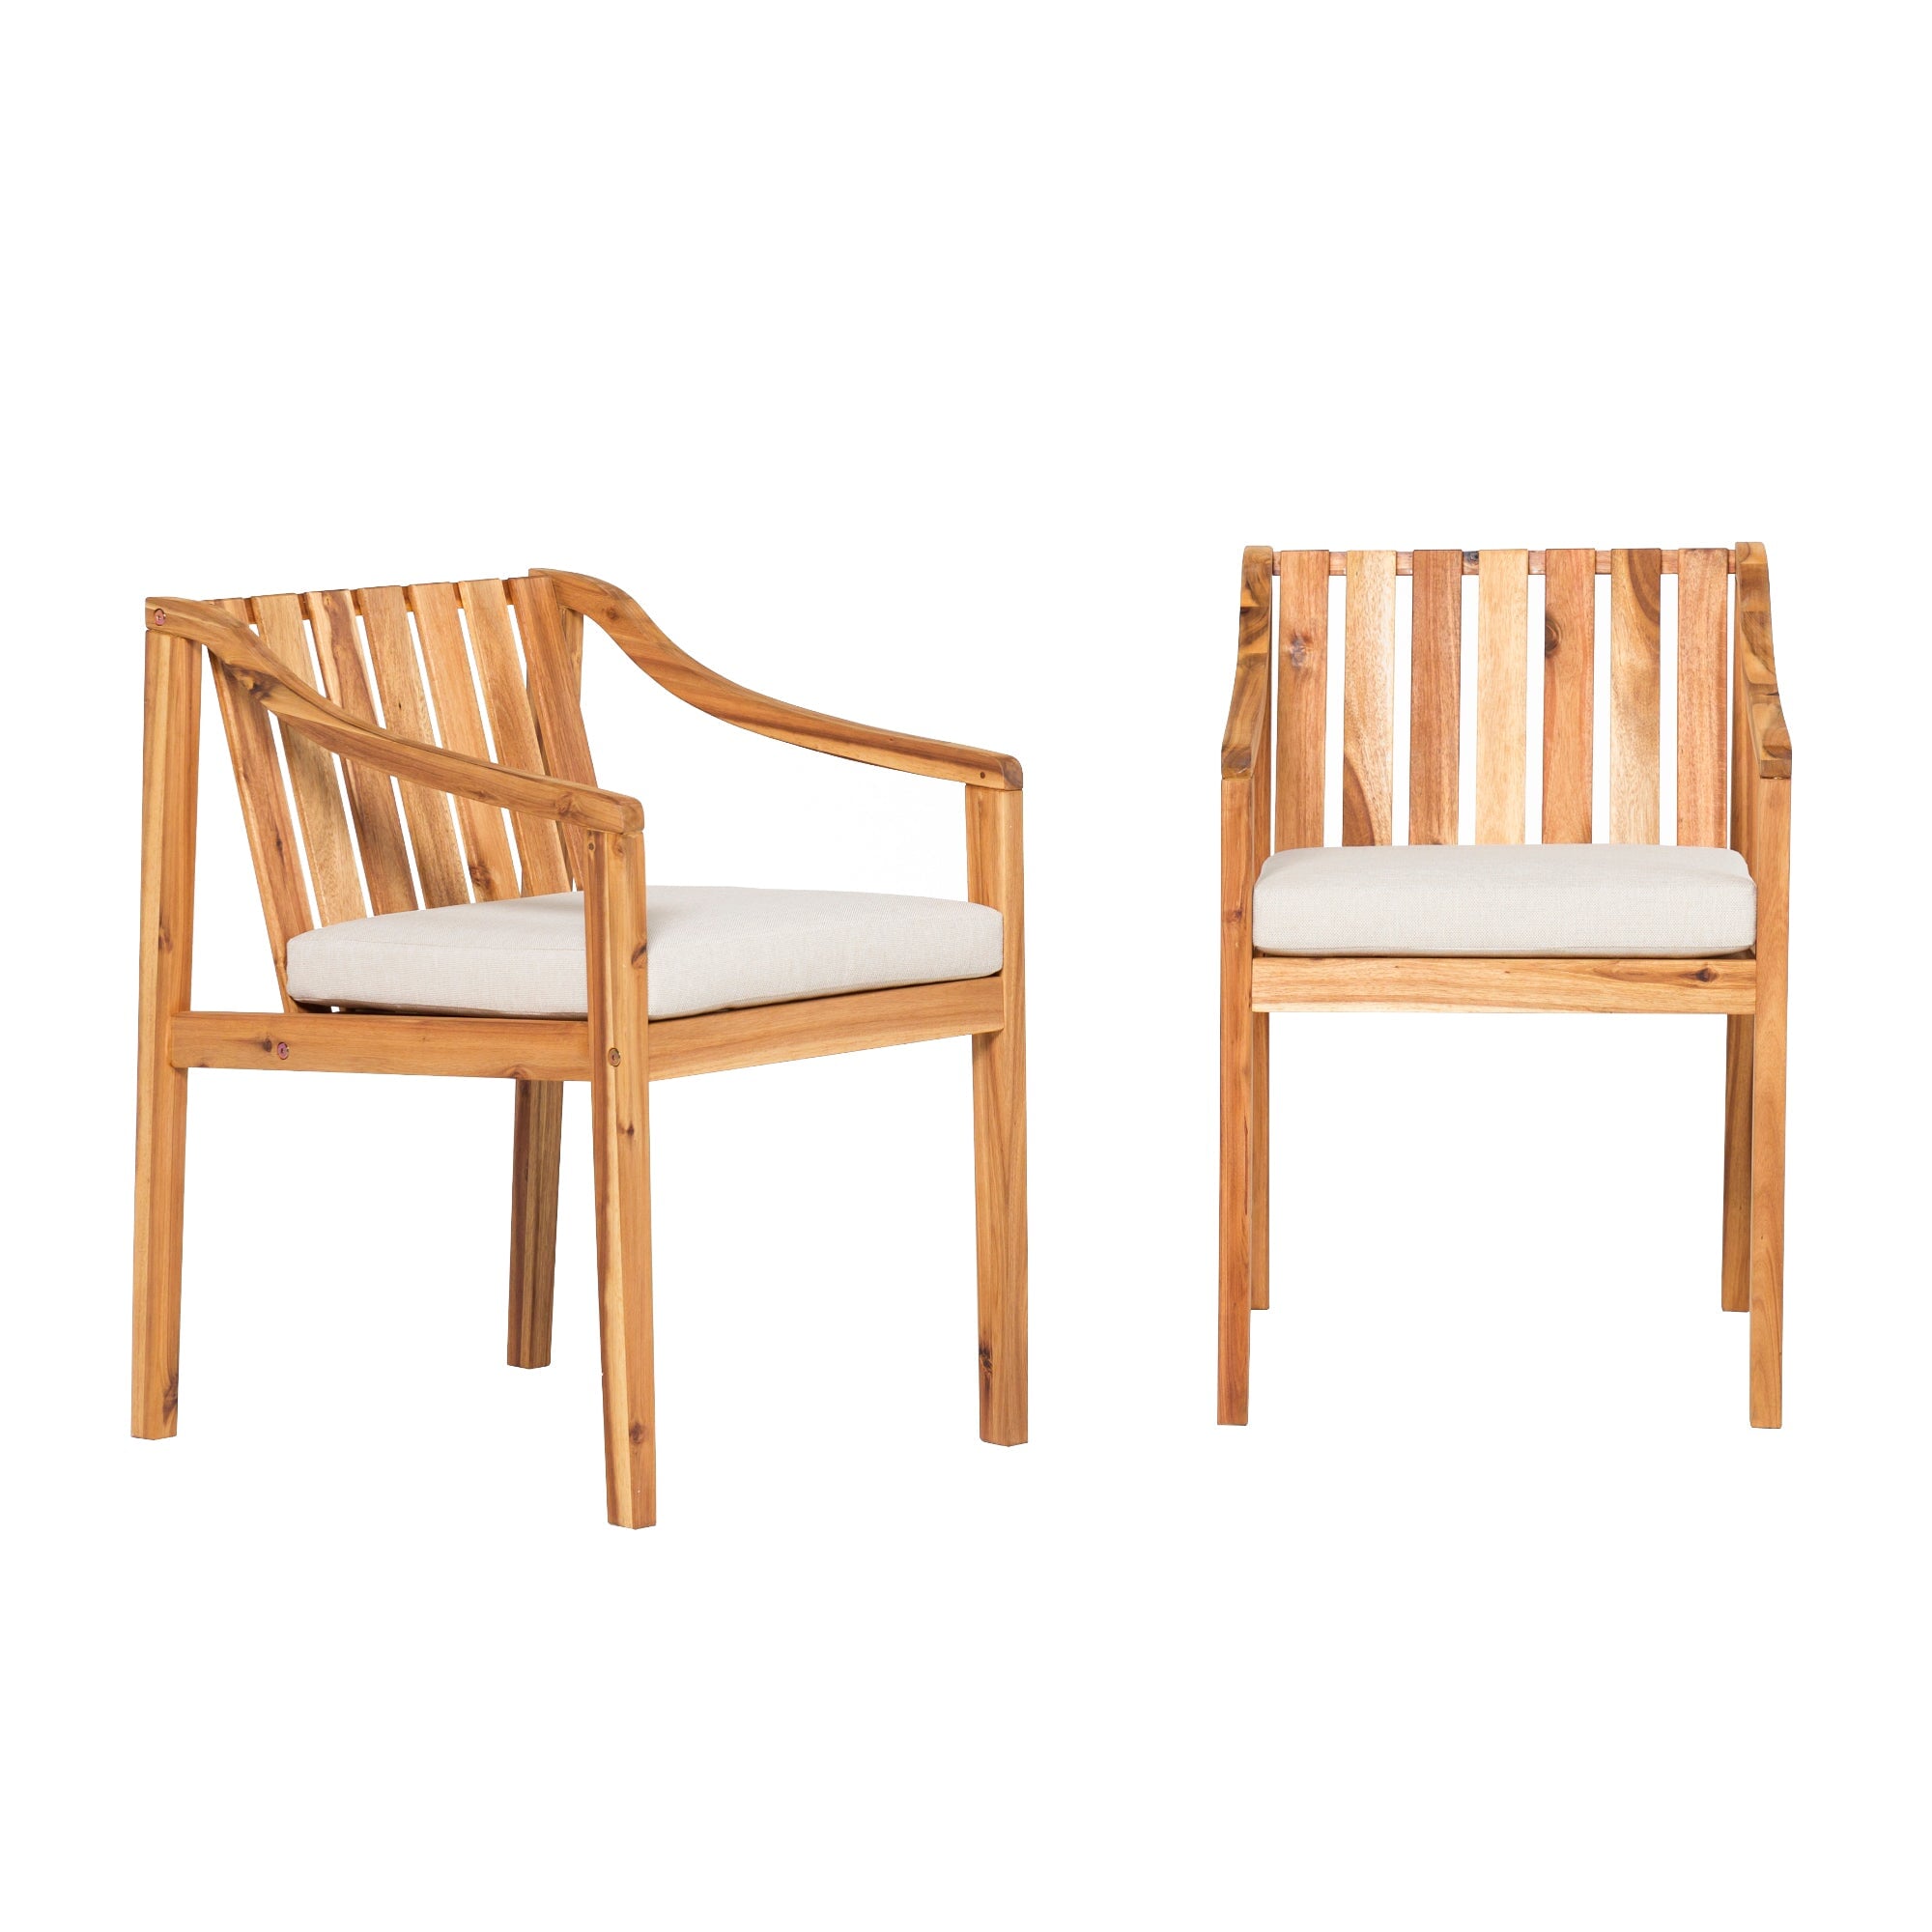 Cologne 2-Piece Modern Solid Wood Outdoor Dining Chair Set